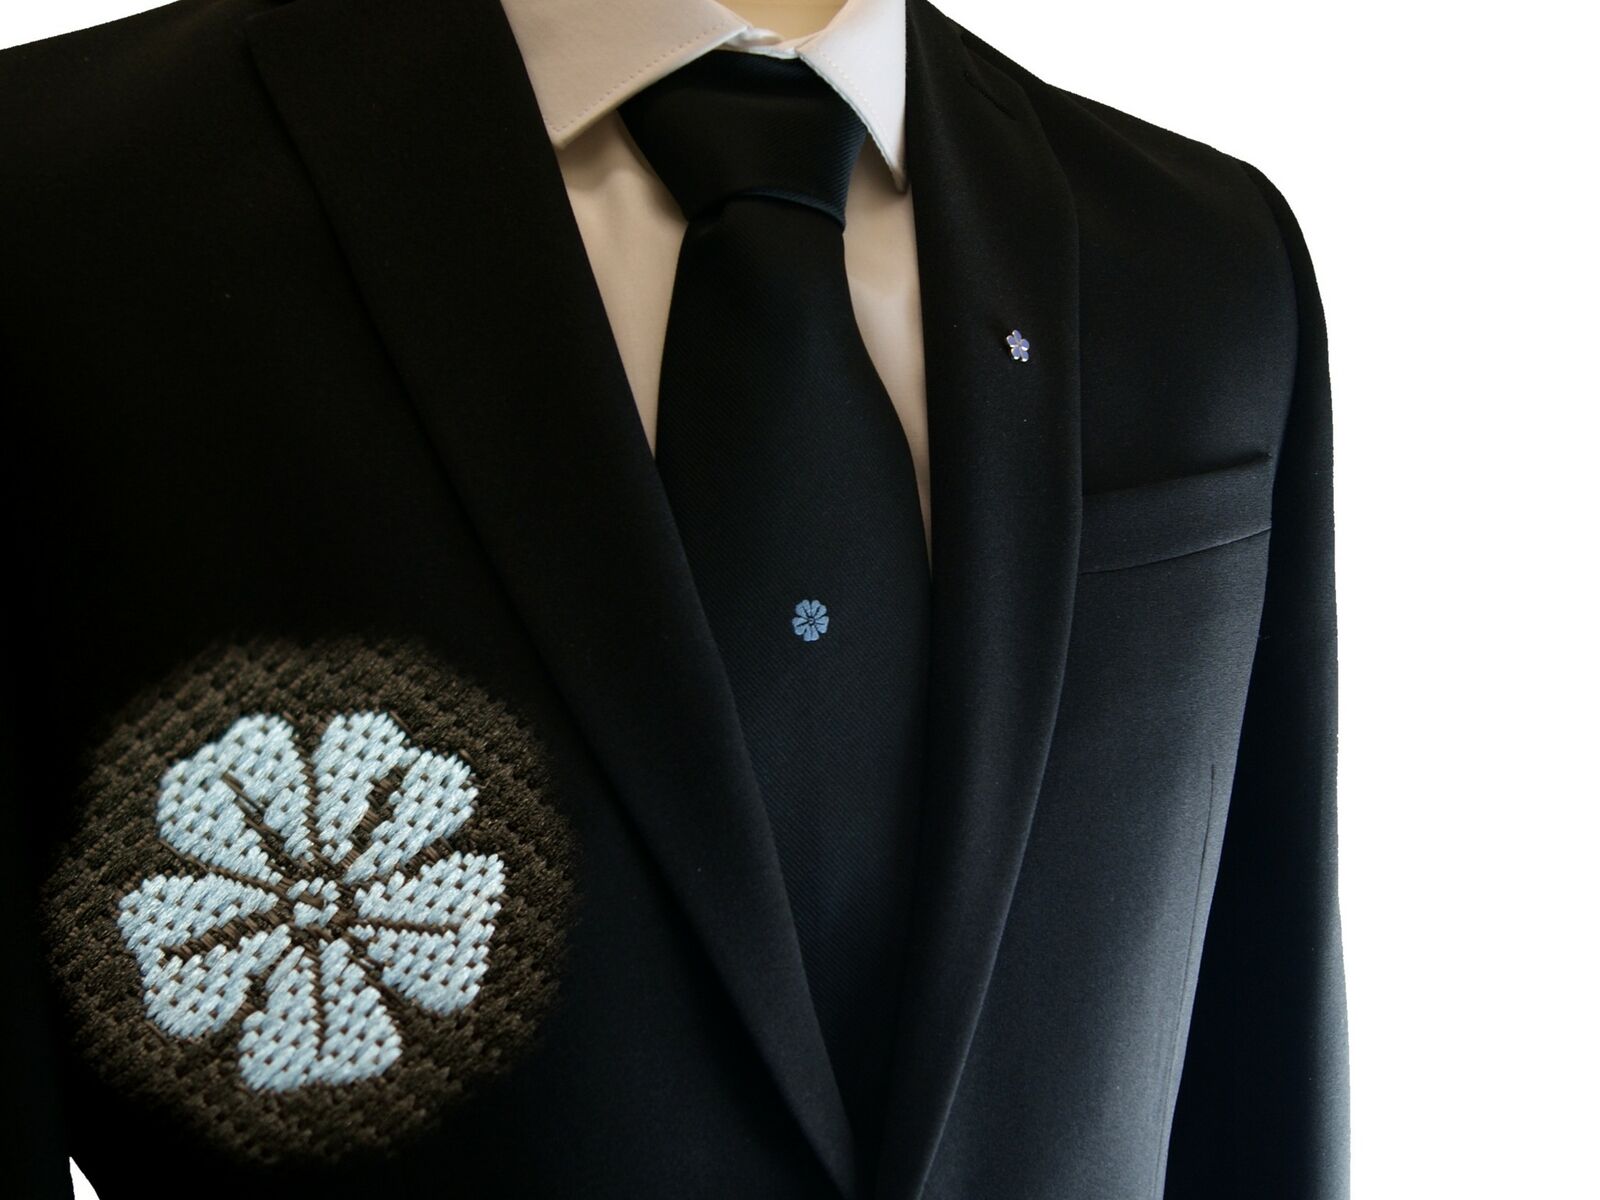 Freemasons Masonic Woven Tie With Forget Me Not Flower - Black